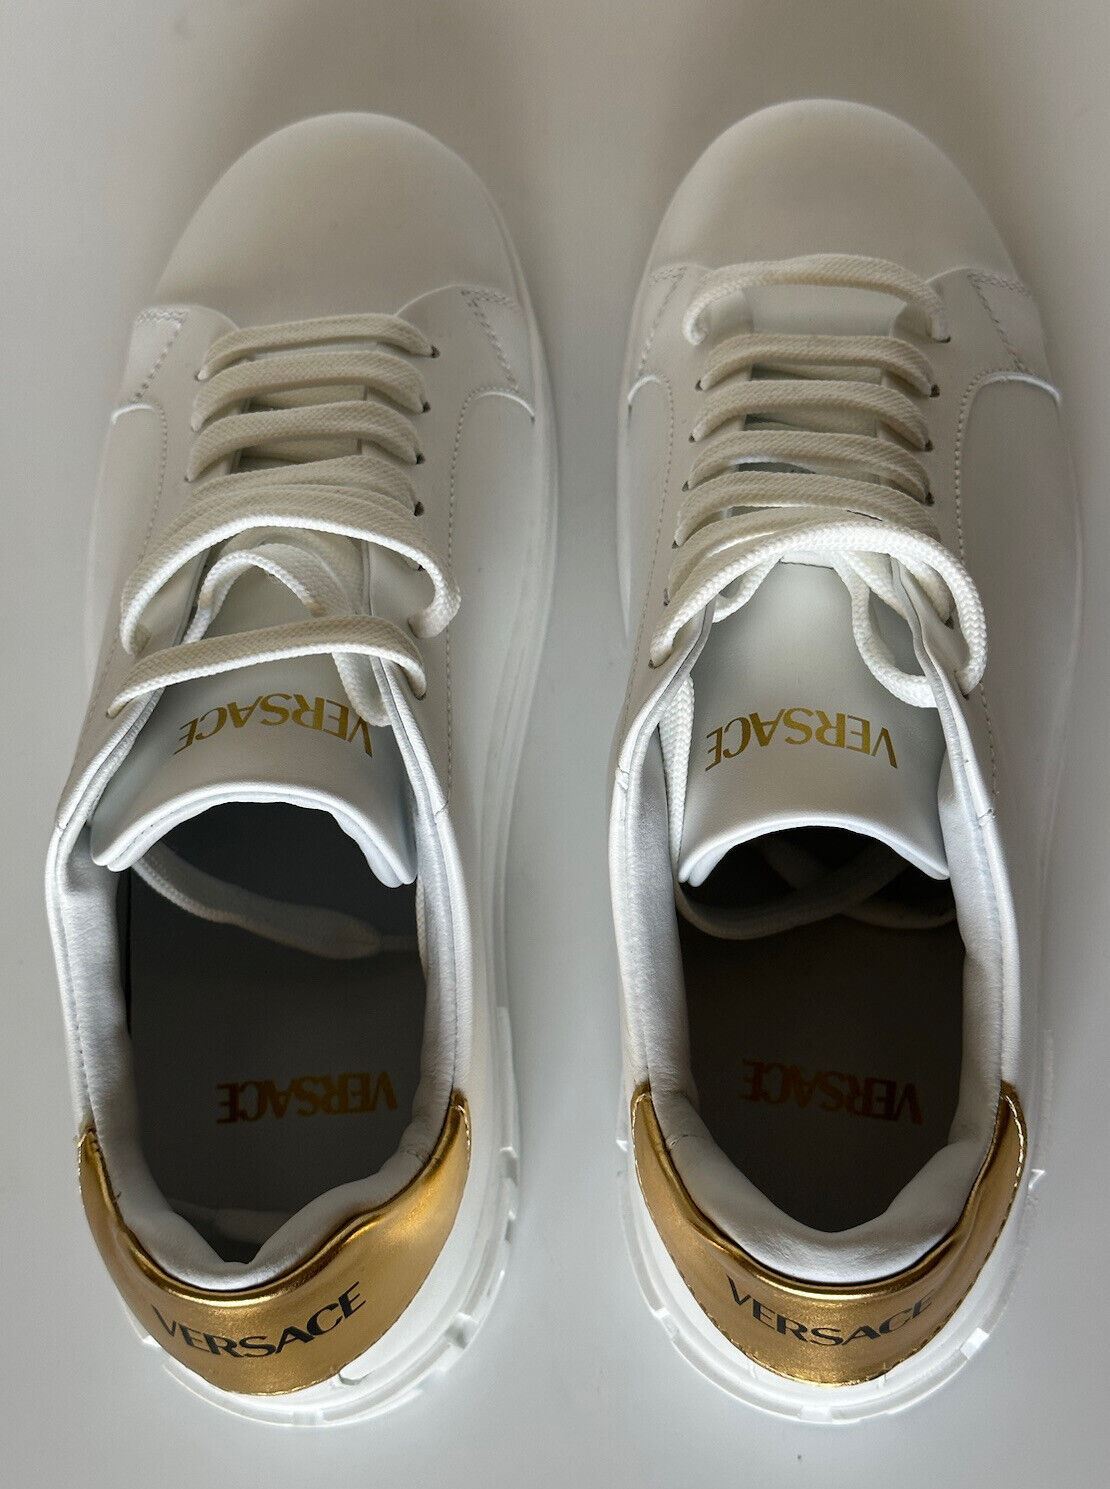 NIB Versace Low Top Women's White Leather Sneakers 9 US (39 Euro) Made in Italy